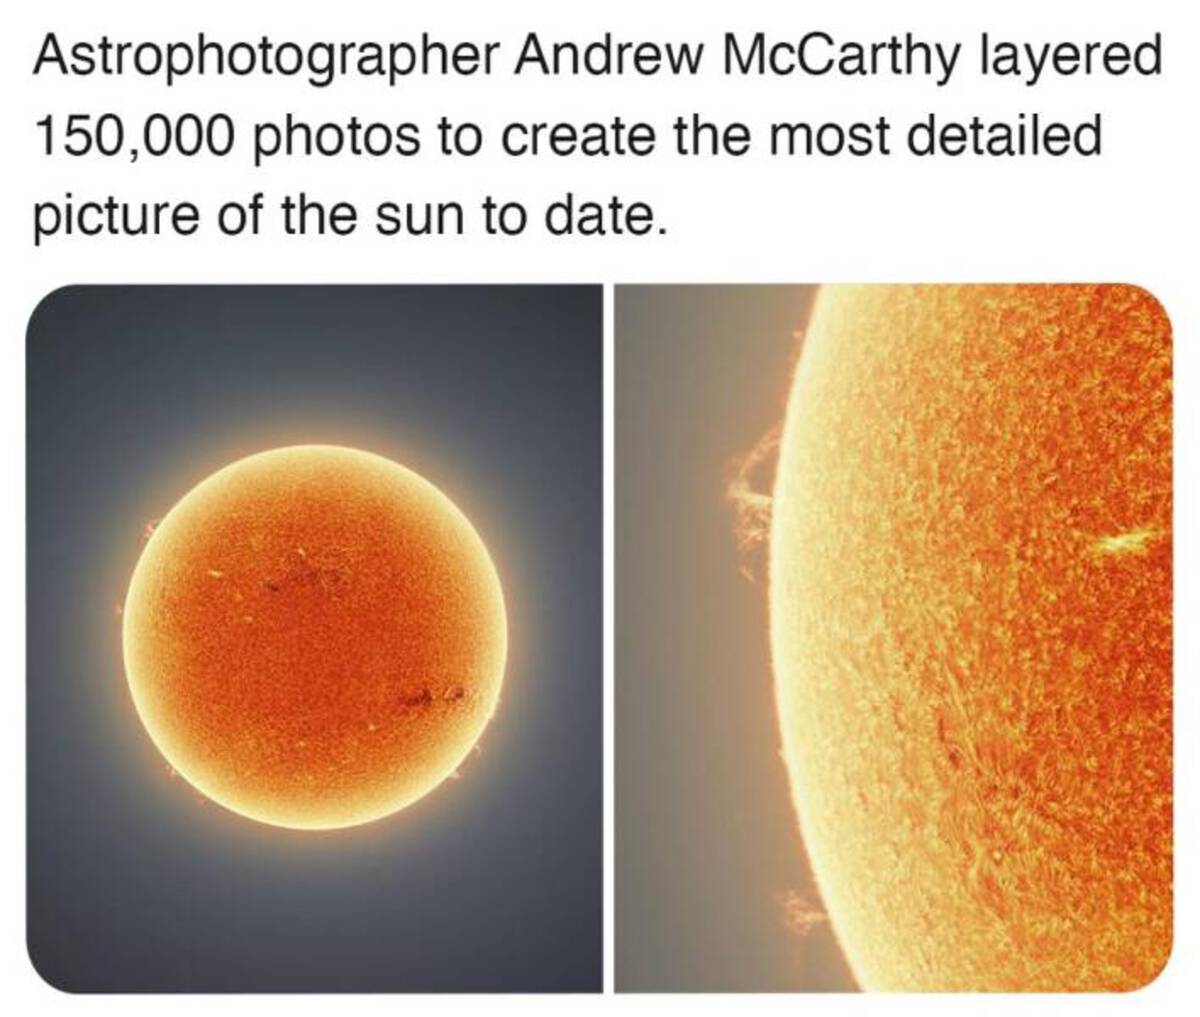 heat - Astrophotographer Andrew McCarthy layered 150,000 photos to create the most detailed picture of the sun to date.